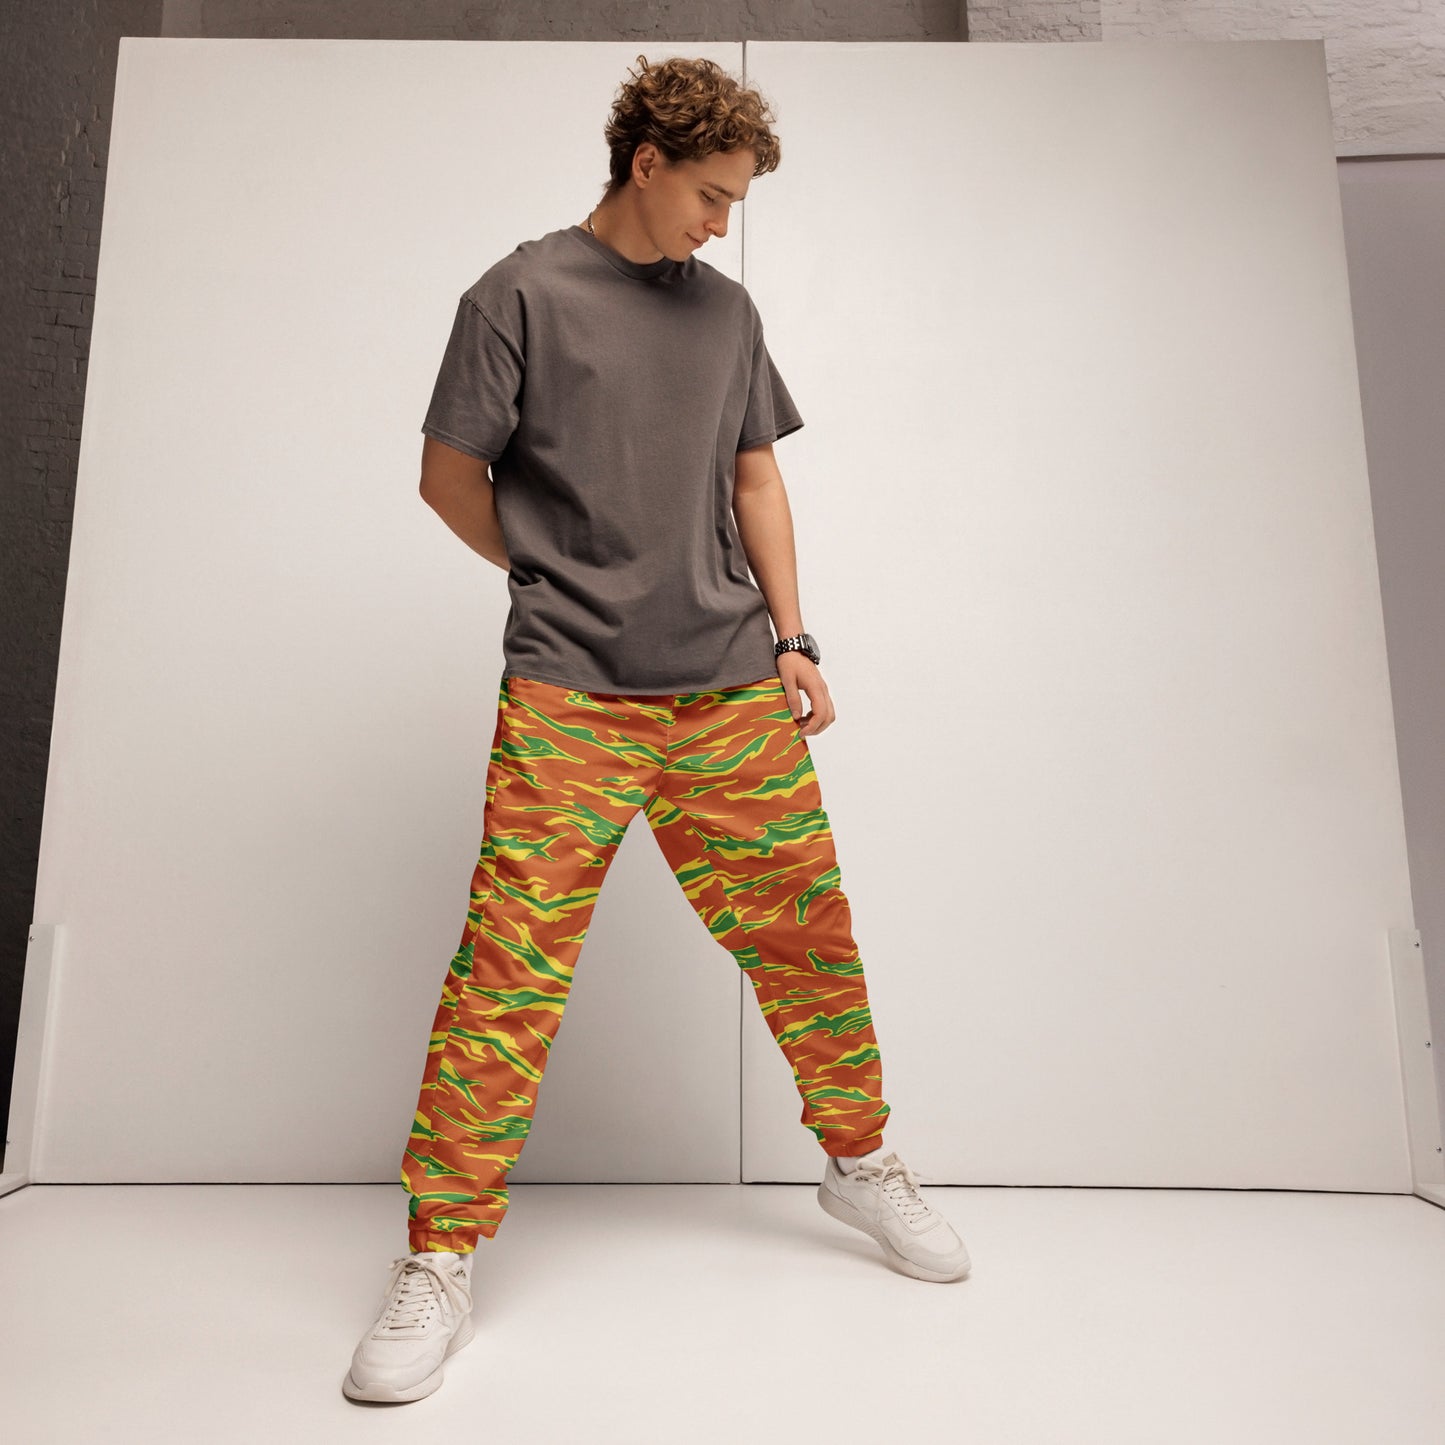 Unisex track pants "Tang Edition"